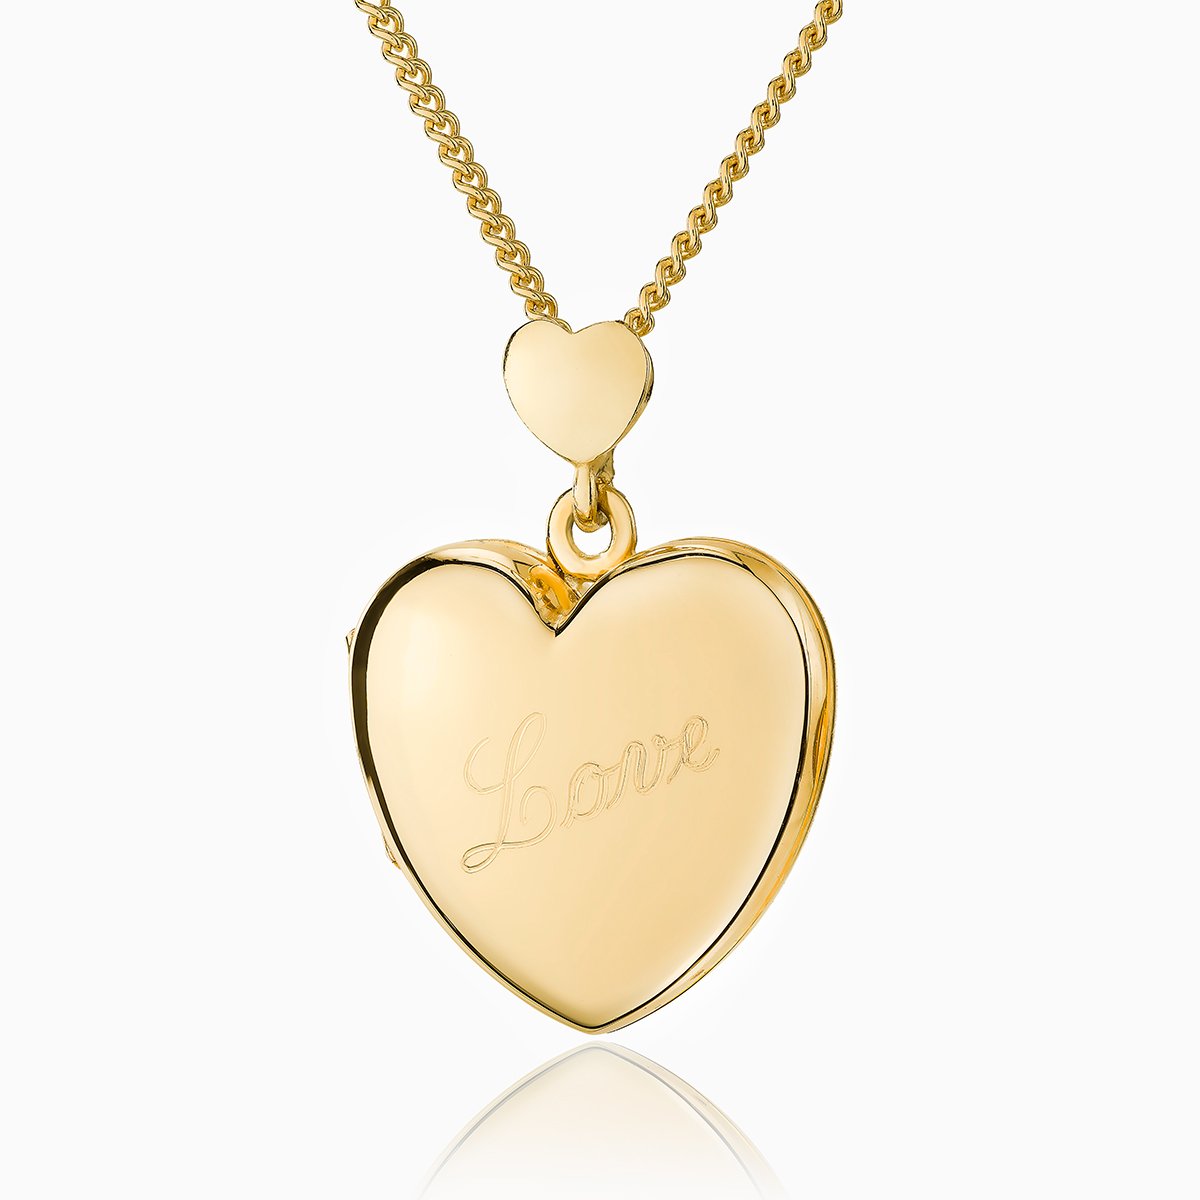 9 ct gold heart locket with a heart shaped bail and the word Love engraved diagonally across the front in a calligraphy scriot, on a 9 ct gold curb chain